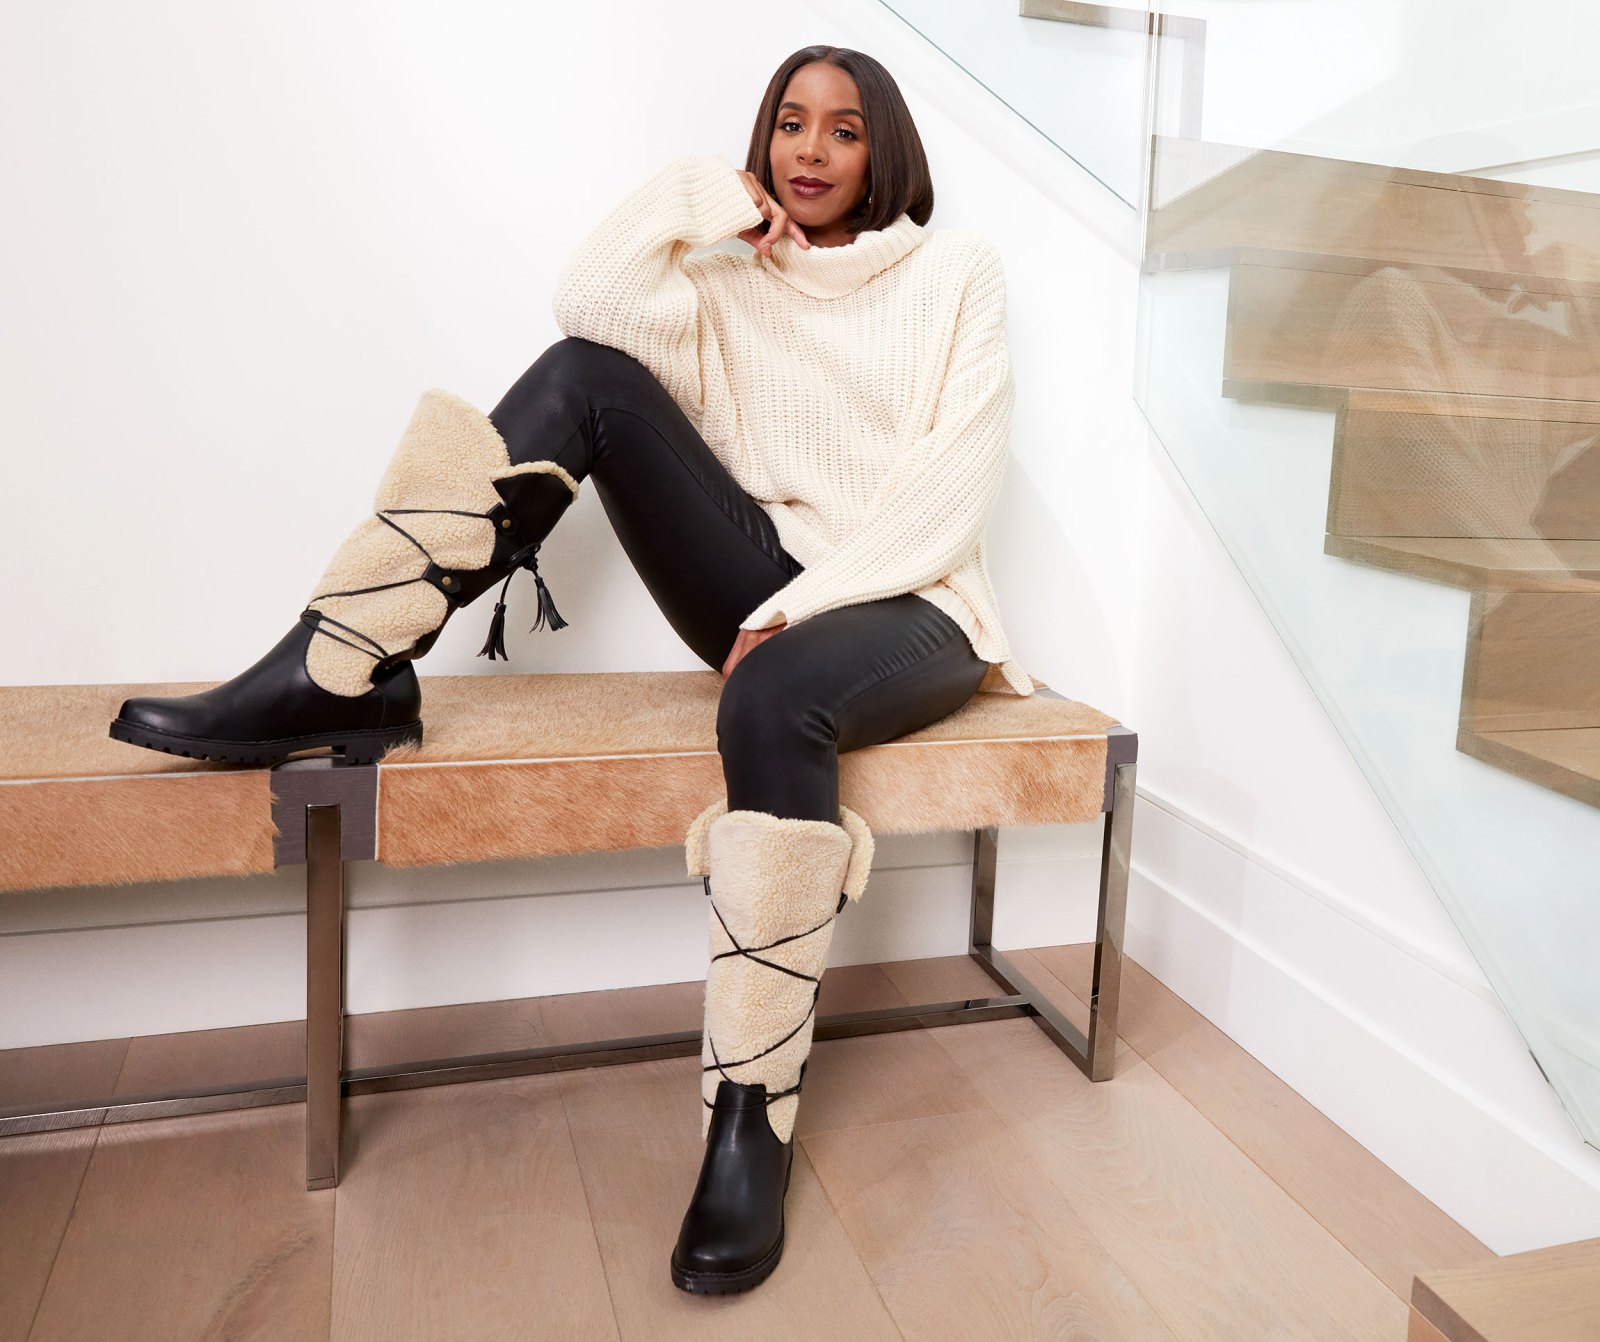 Kelly Rowland Stuns in JustFab Campaign: See Our Favorite Pics